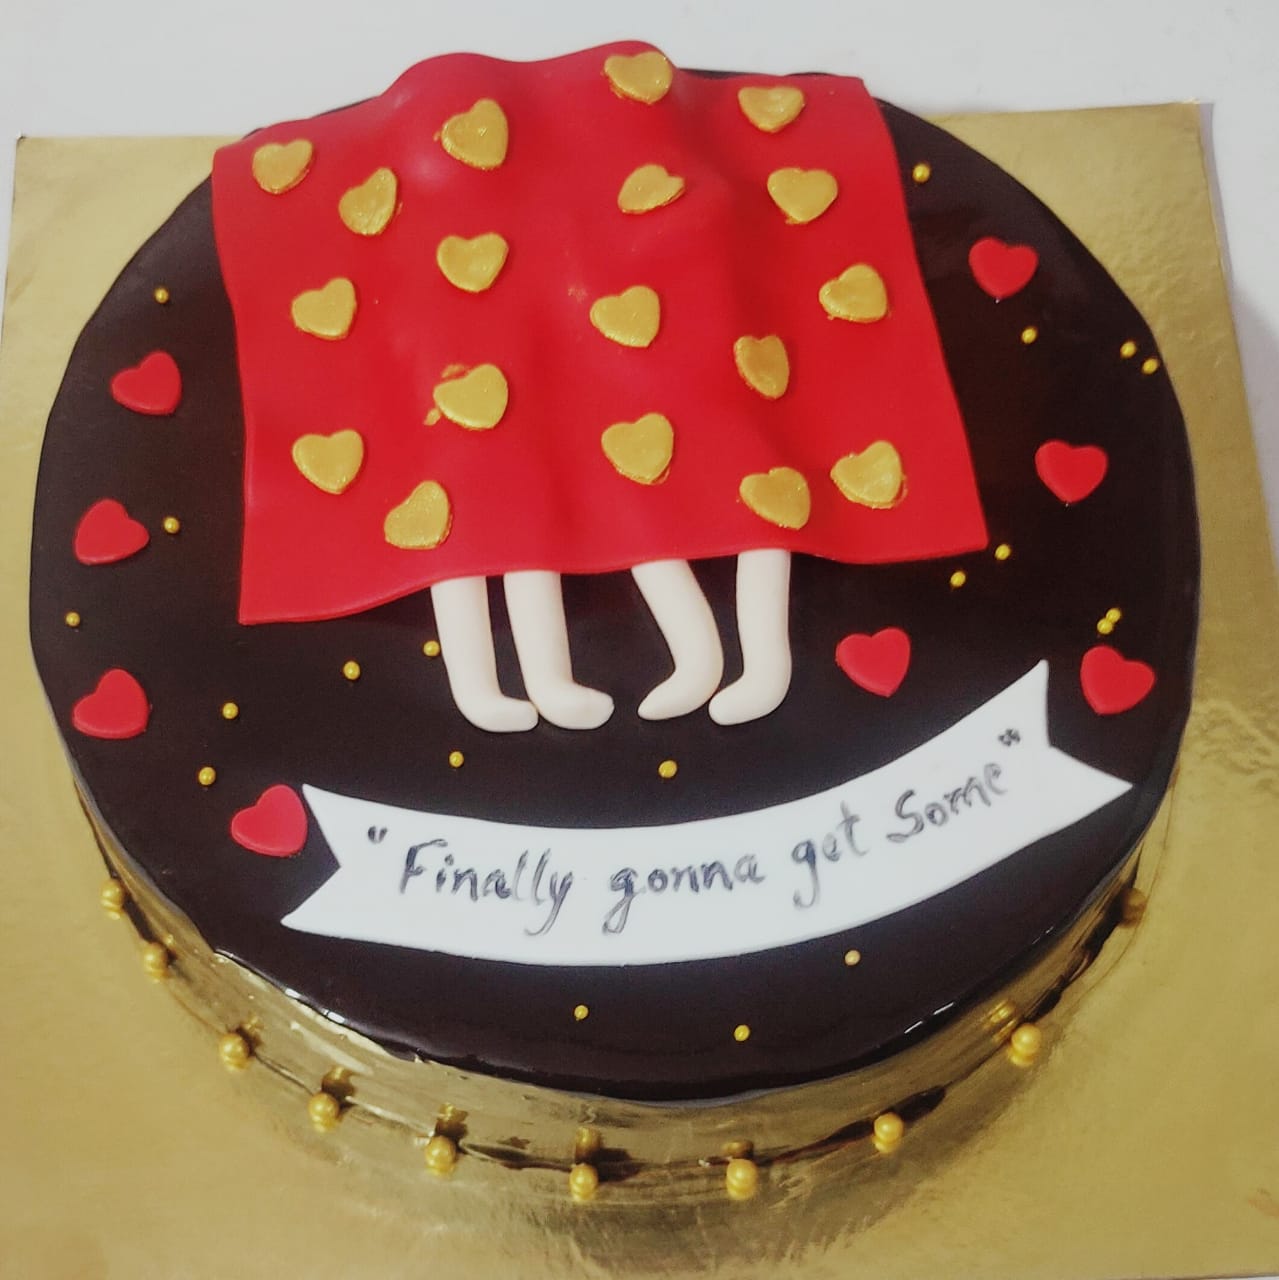 A semi-fondant adult-themed cake with a red skirt design and playful heart decorations.